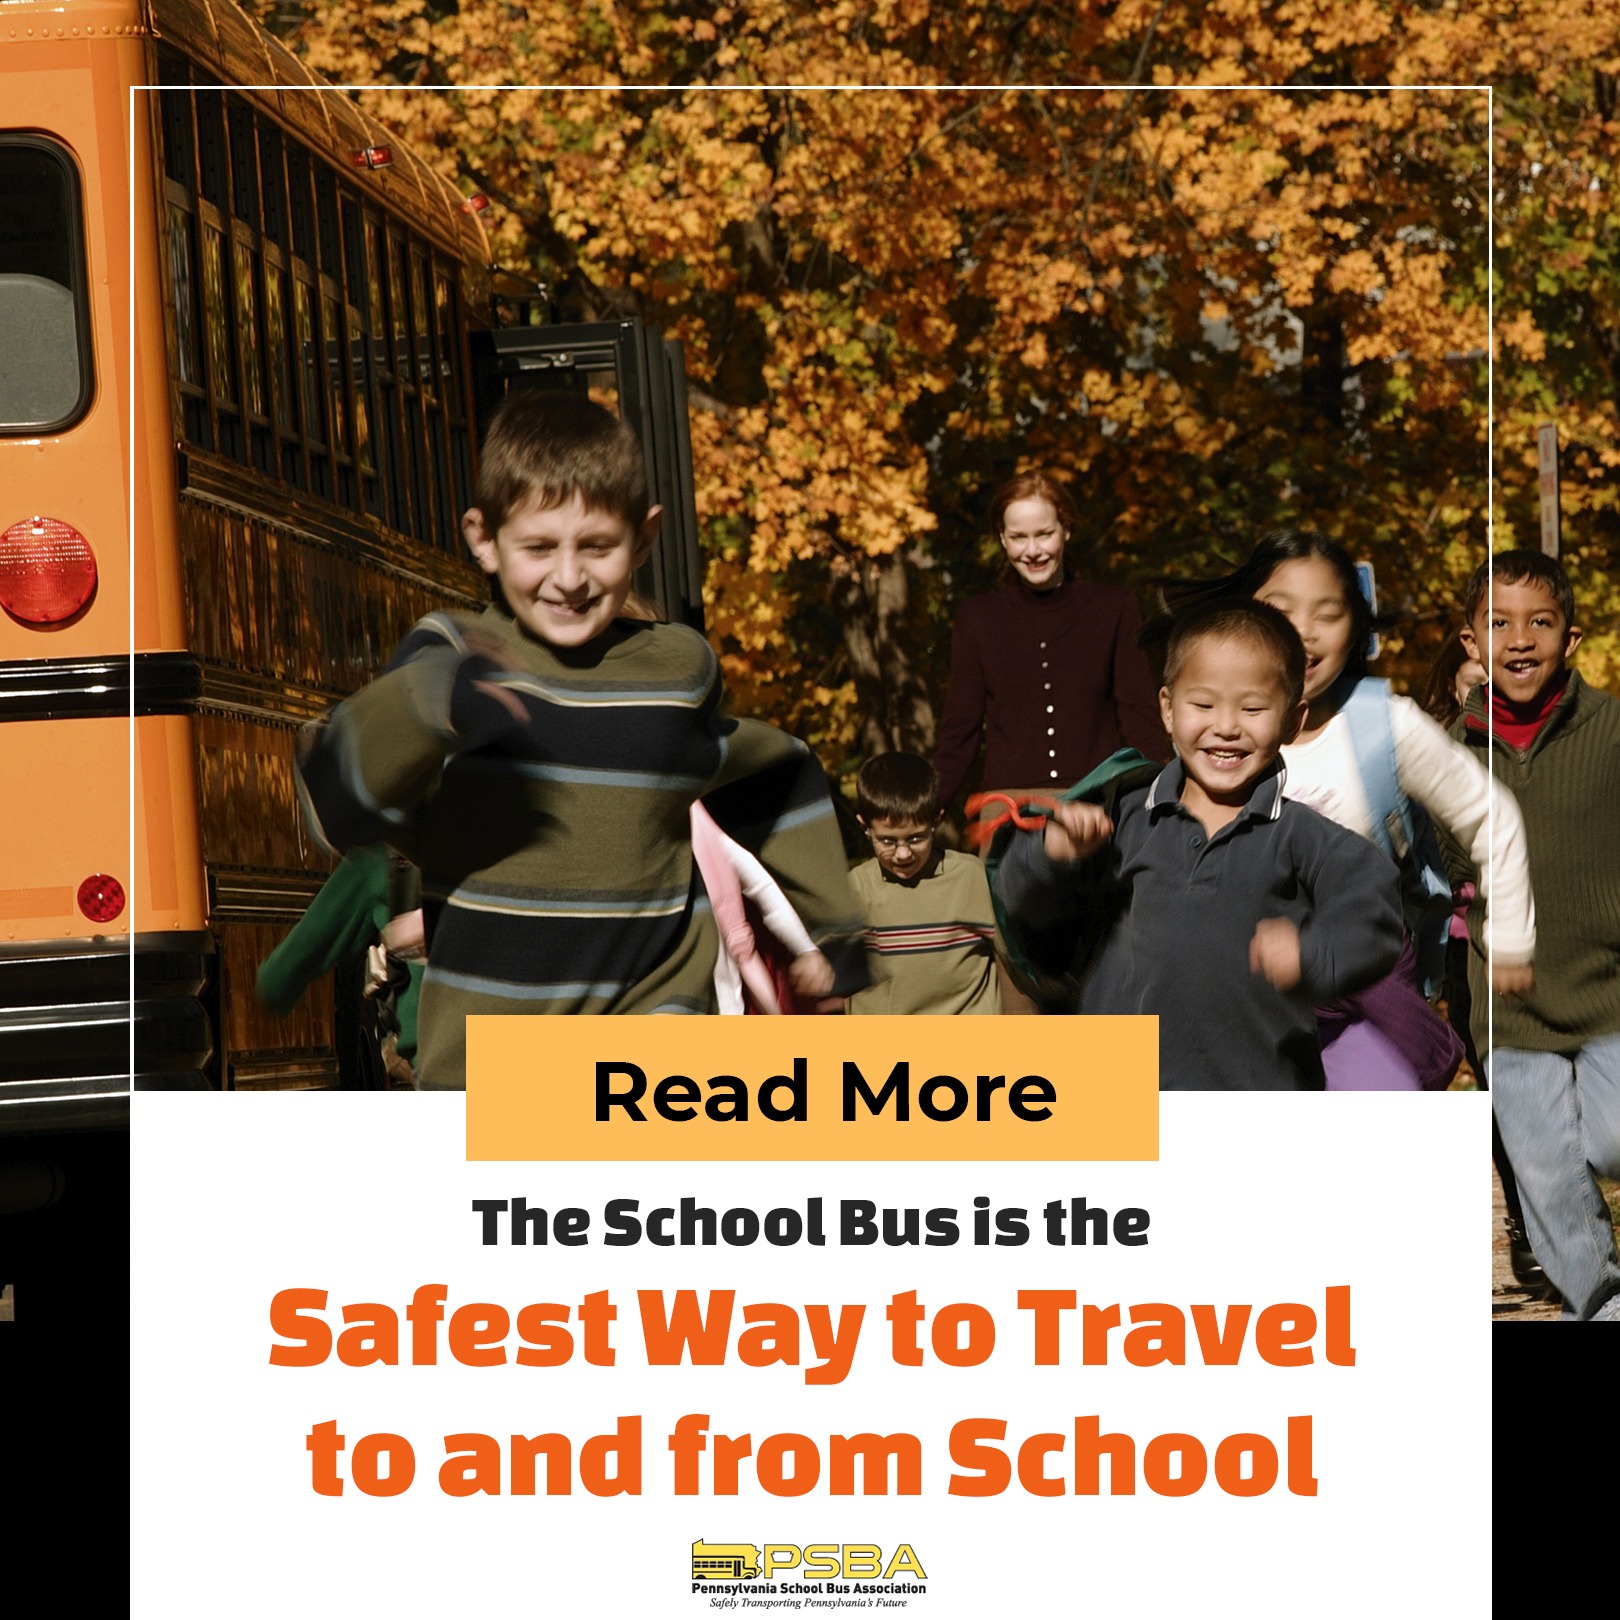 The School Bus Is the Safest Way to Travel to and from School